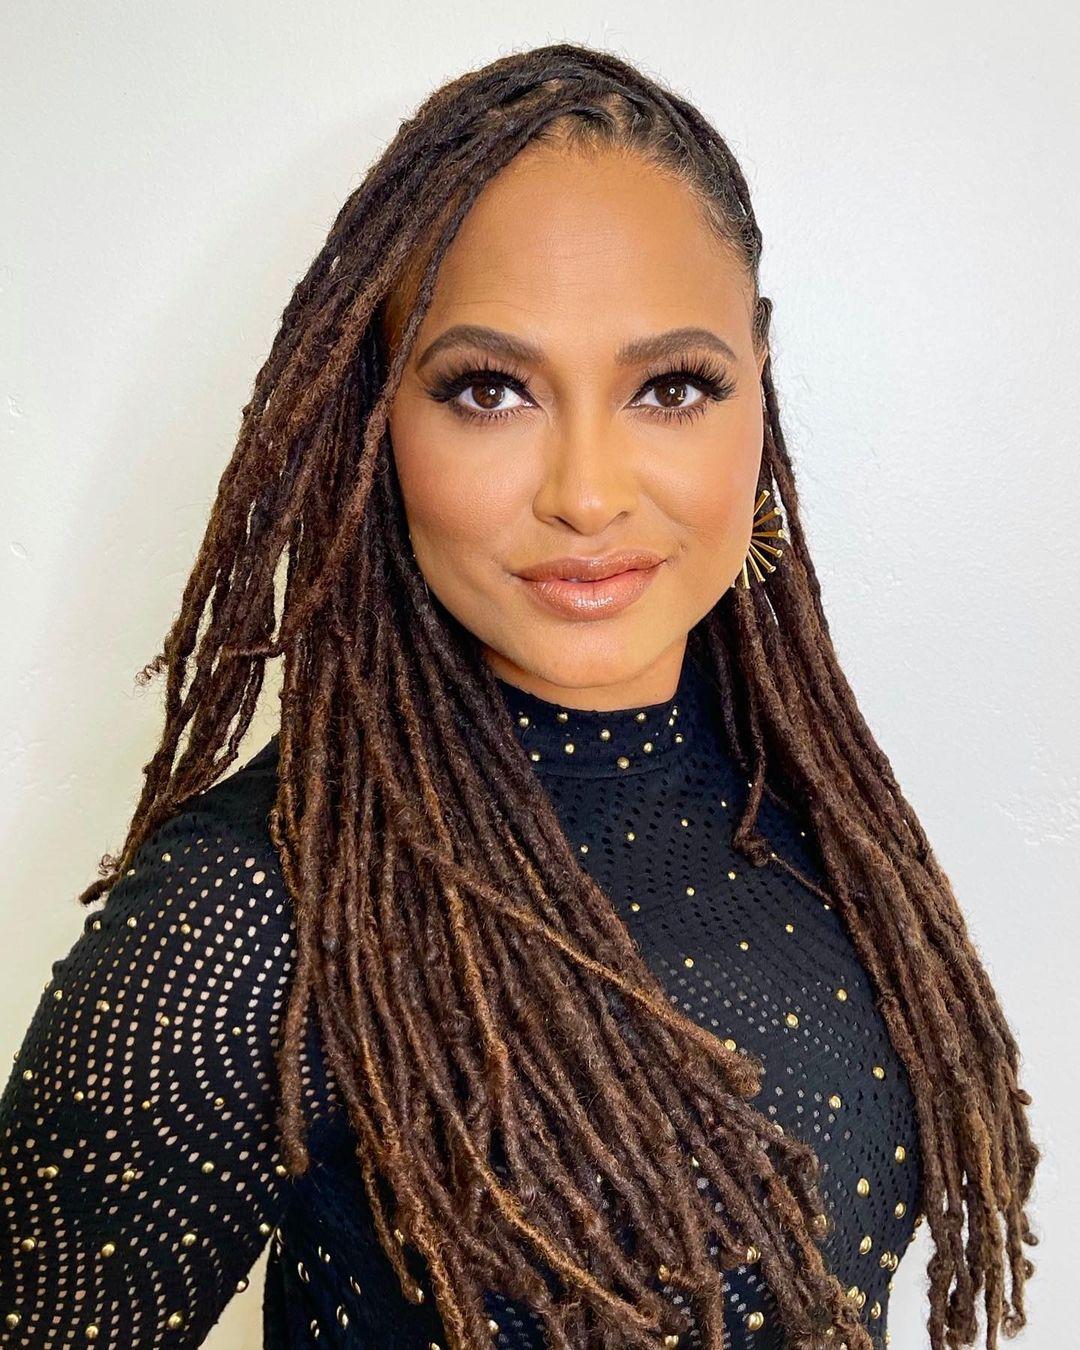 An up-close photo of Ava DuVernay sporting dreads.